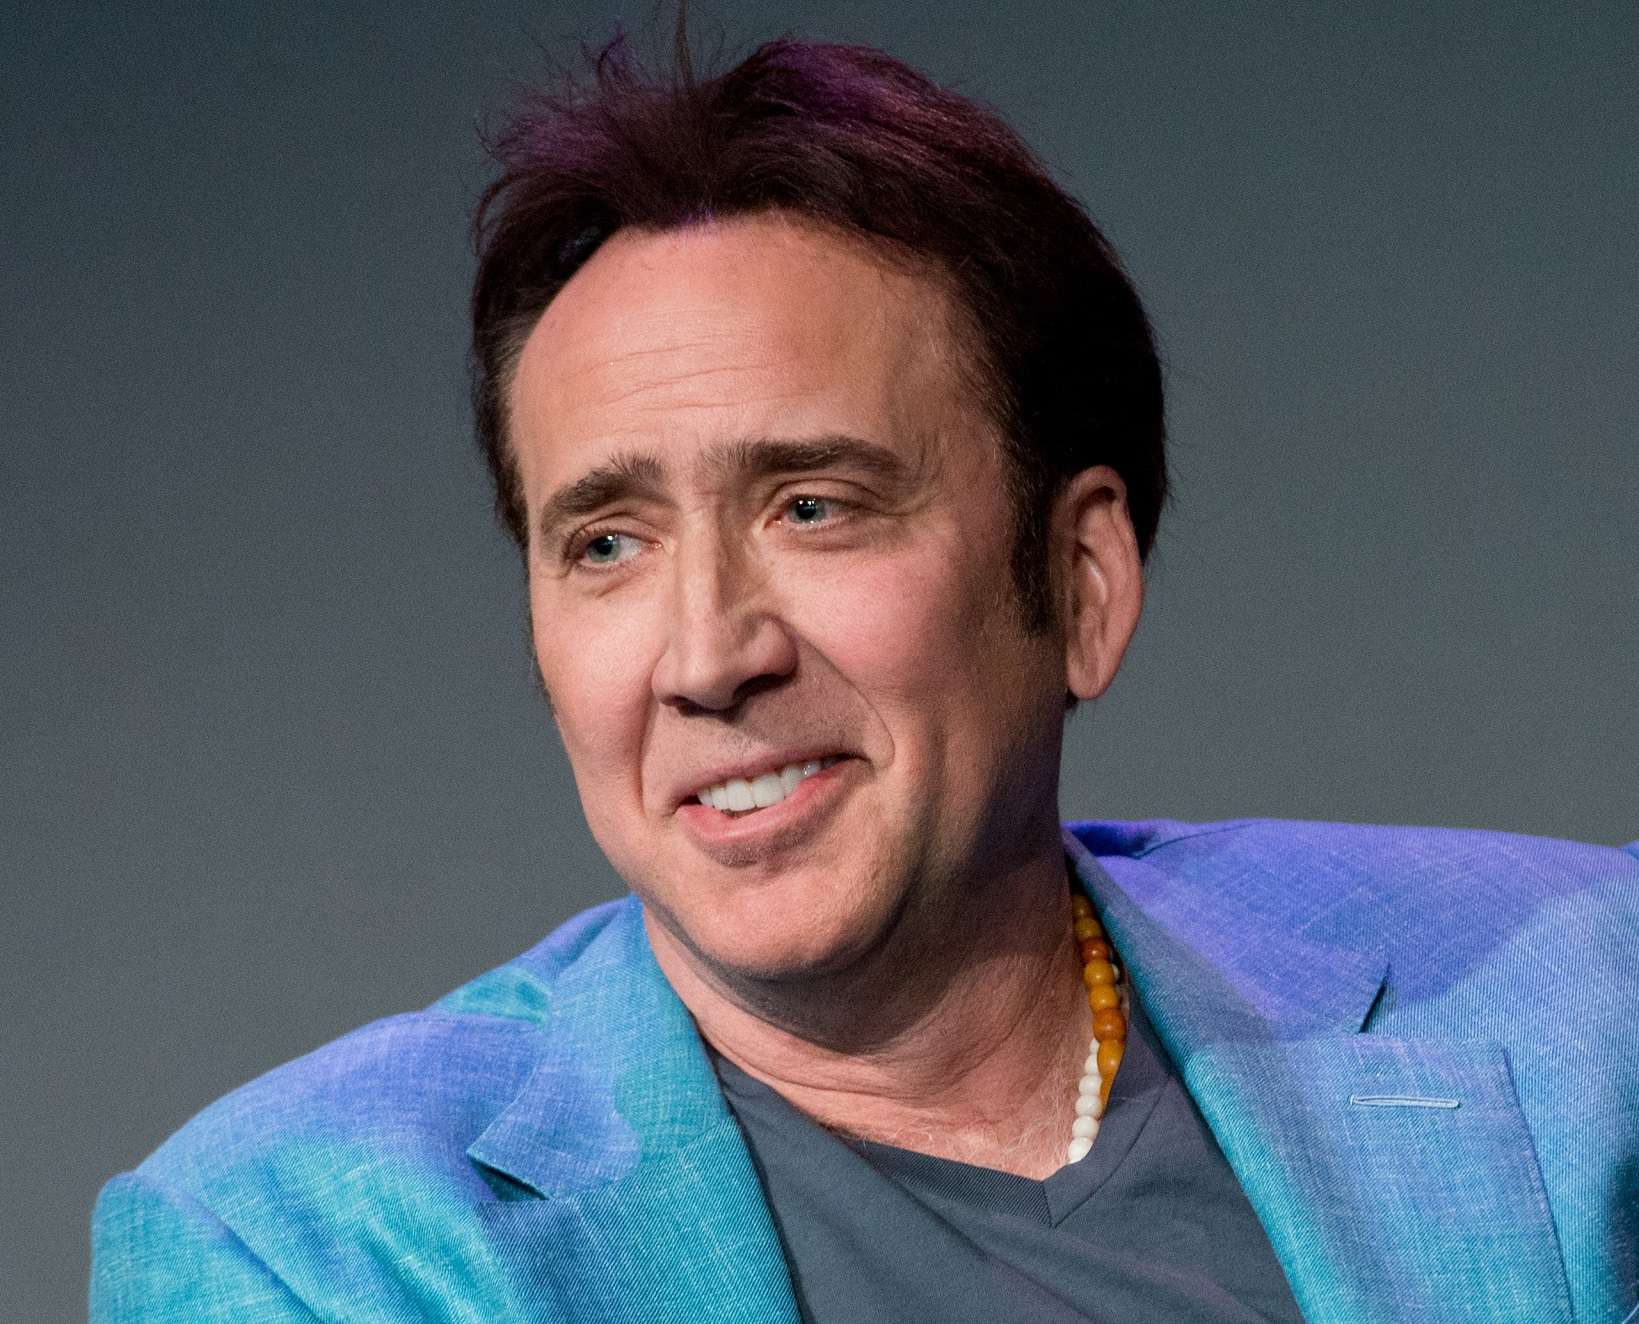 Taboola Ad Example 48141 - Nicolas Cage's Car Cost Him $3.6M, And This Is What It Looks Like